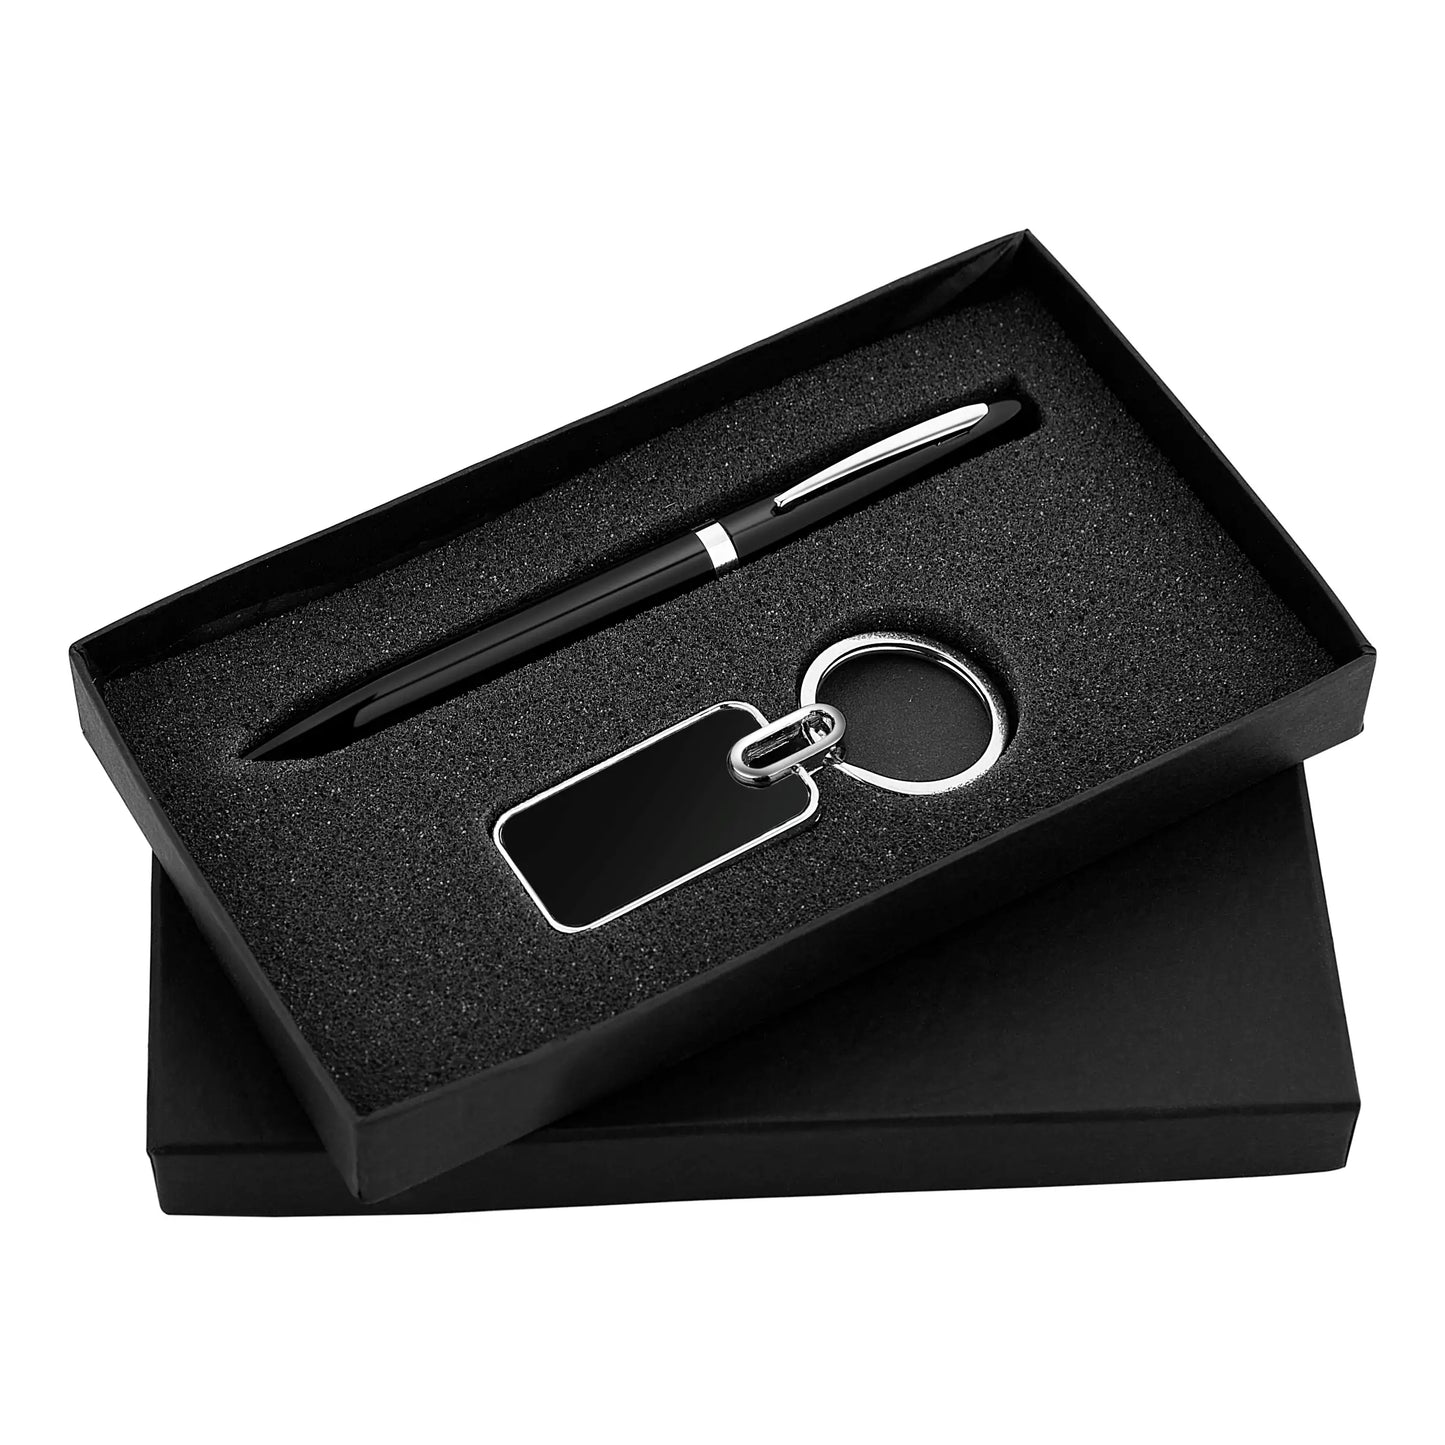 Pen and Keychain 2in1 Combo Gift Set - For Employee Joining Kit, Corporate, Client or Dealer Gifting, Promotional Freebie JKSR103